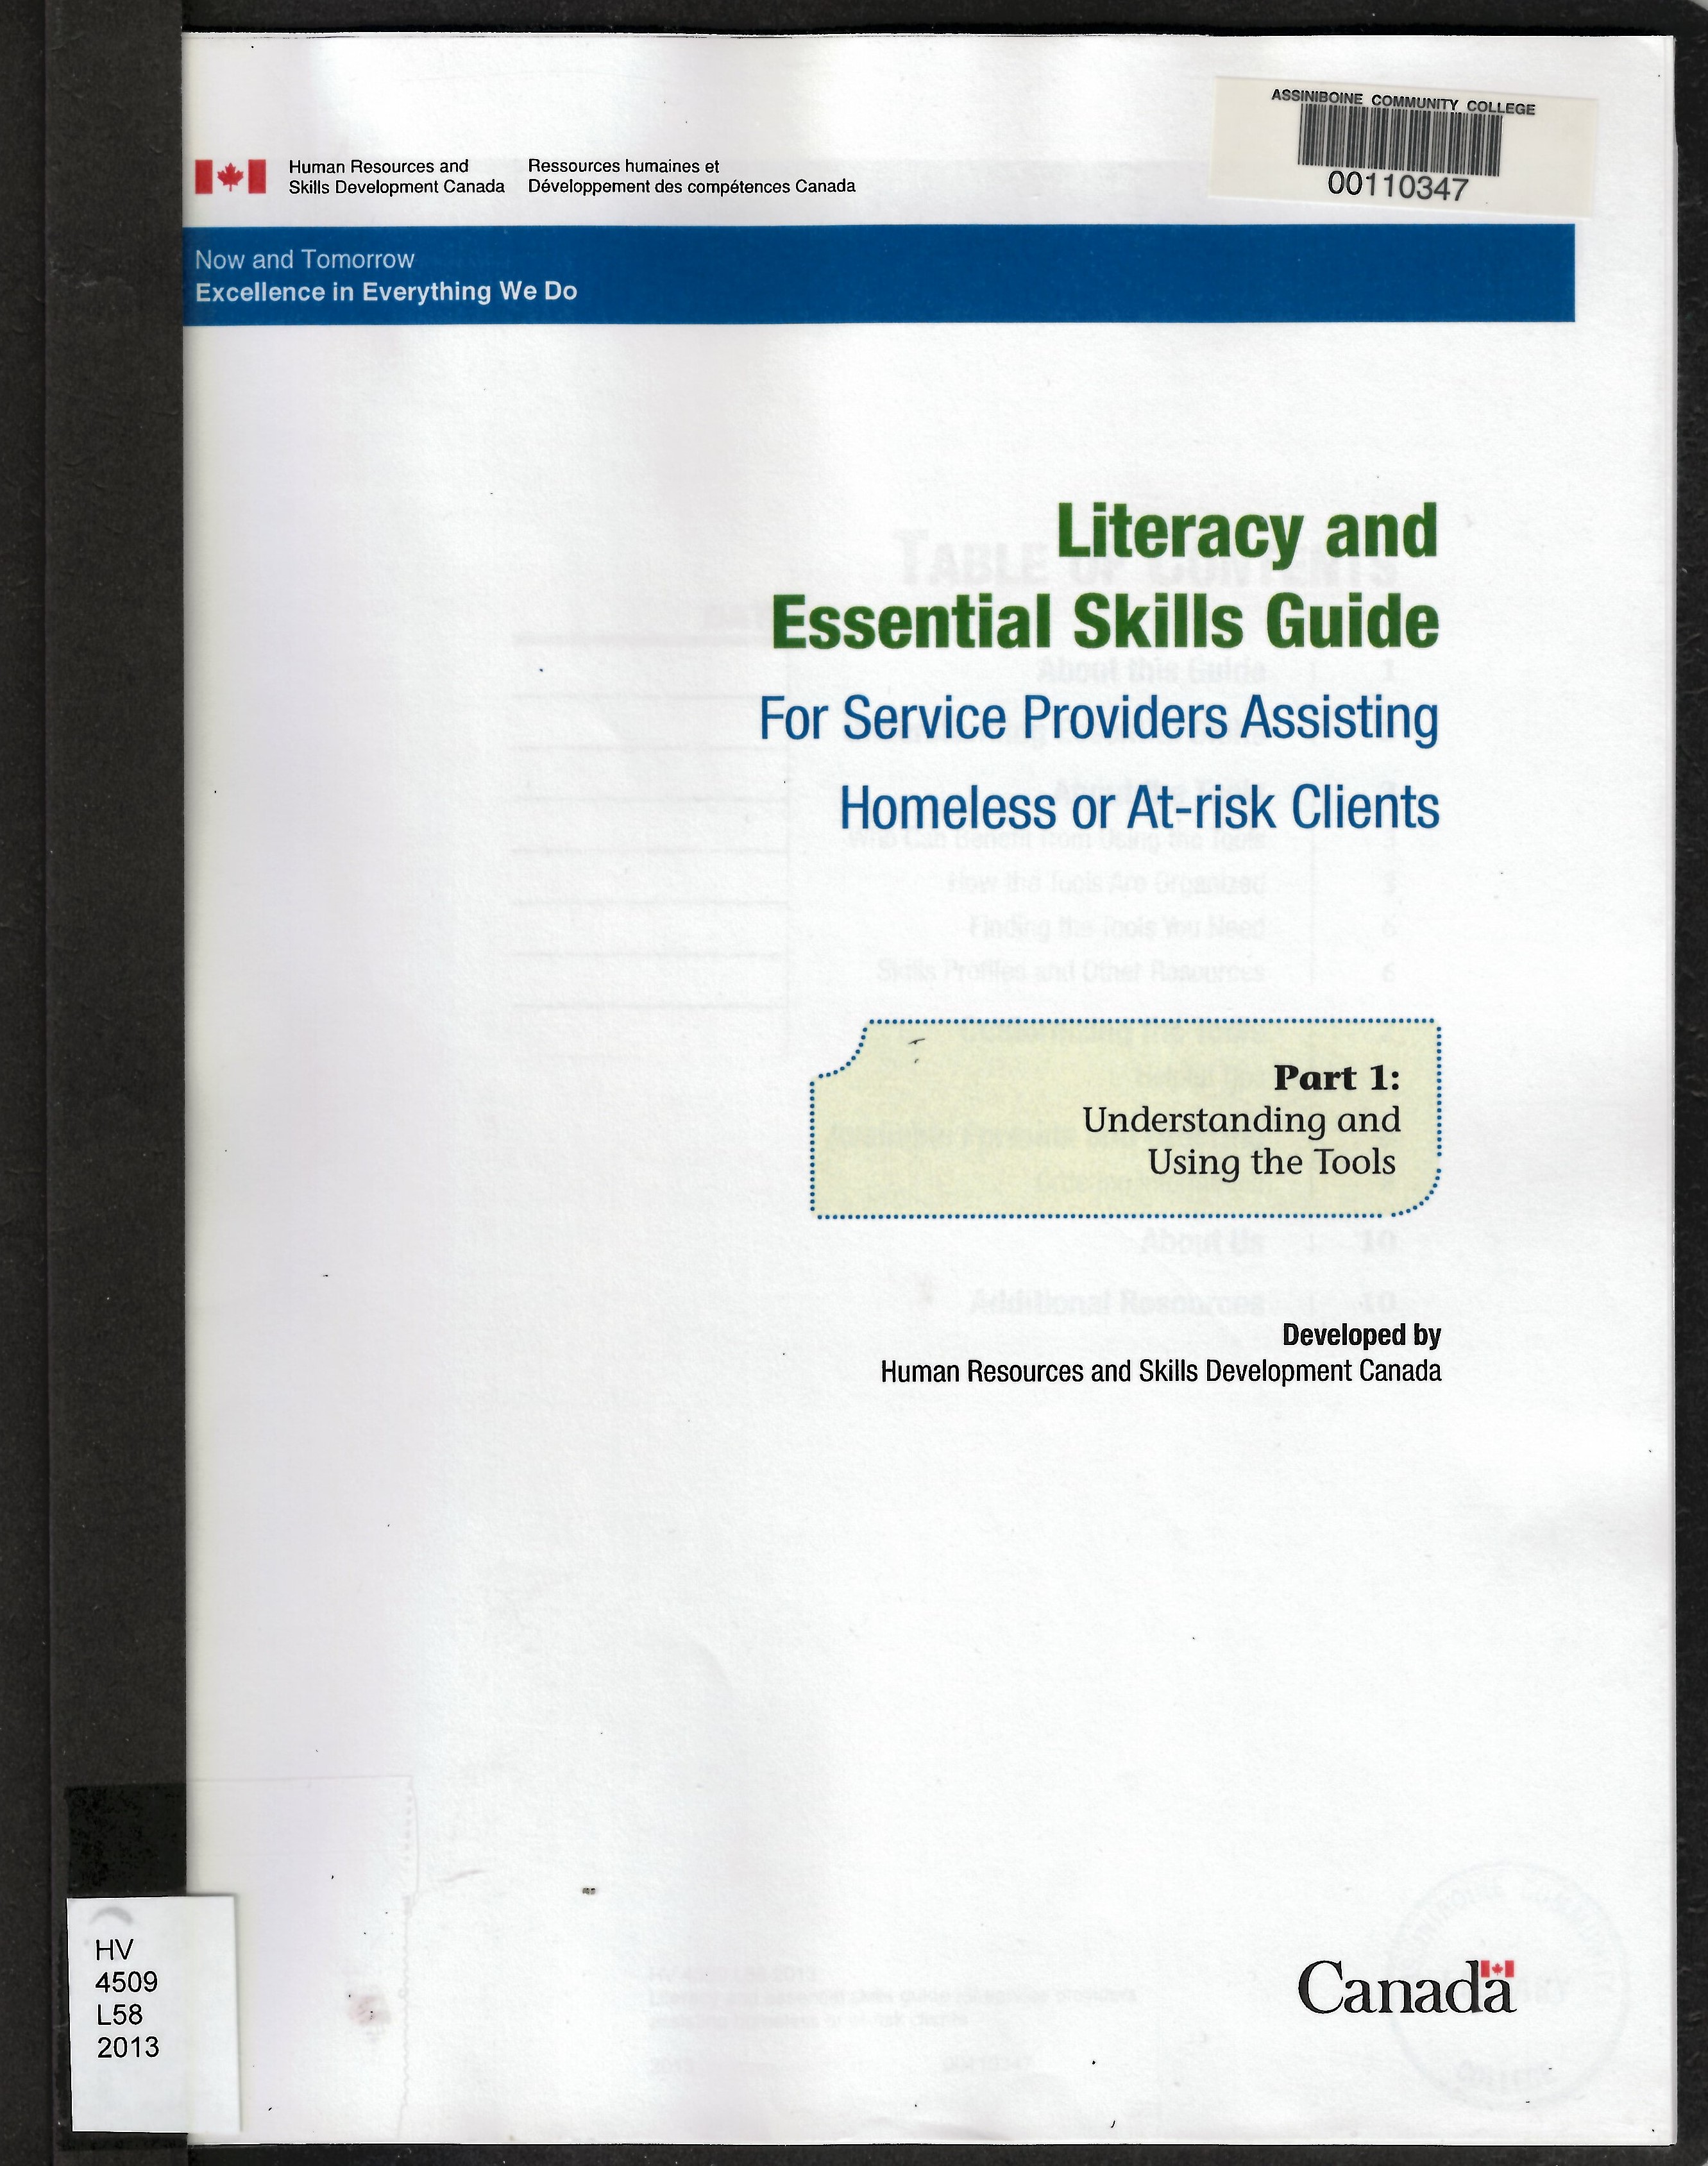 Literacy and essential skills guide for service providers assisting homeless or at-risk clients